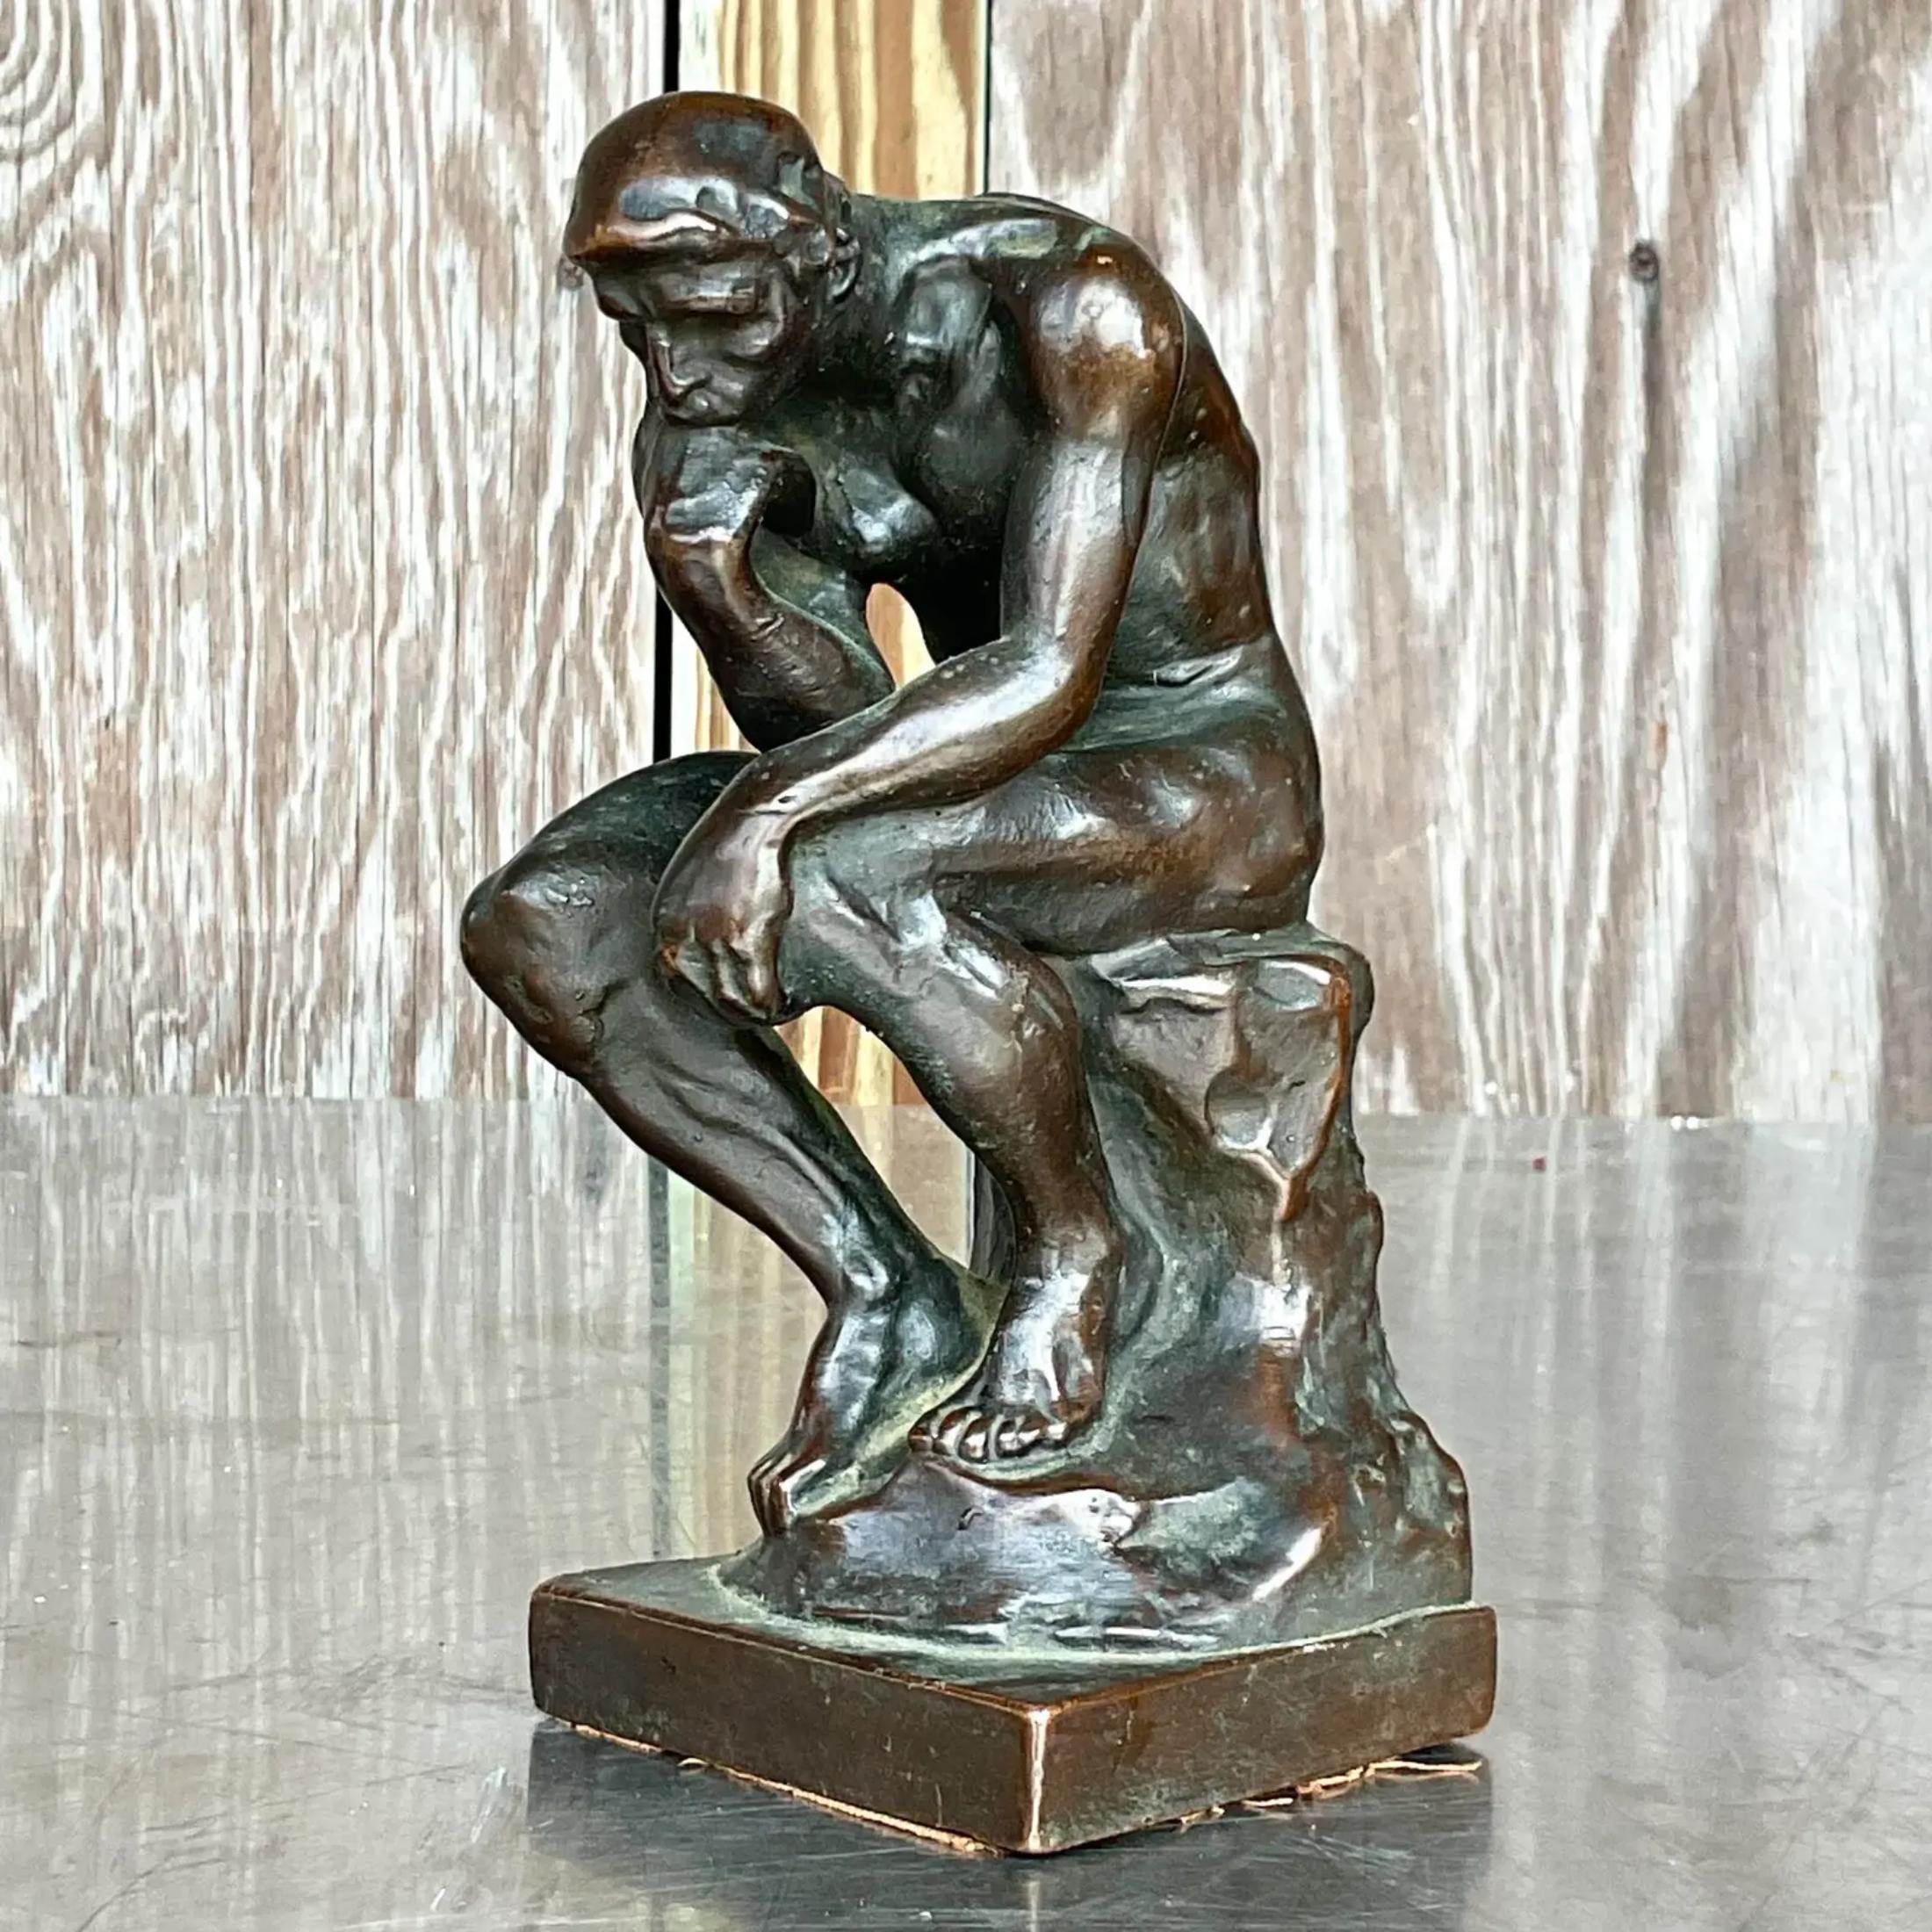 Vintage Regency Patinated Plaster Agusta Rodin “The Thinker” Bookends - a Pair For Sale 2